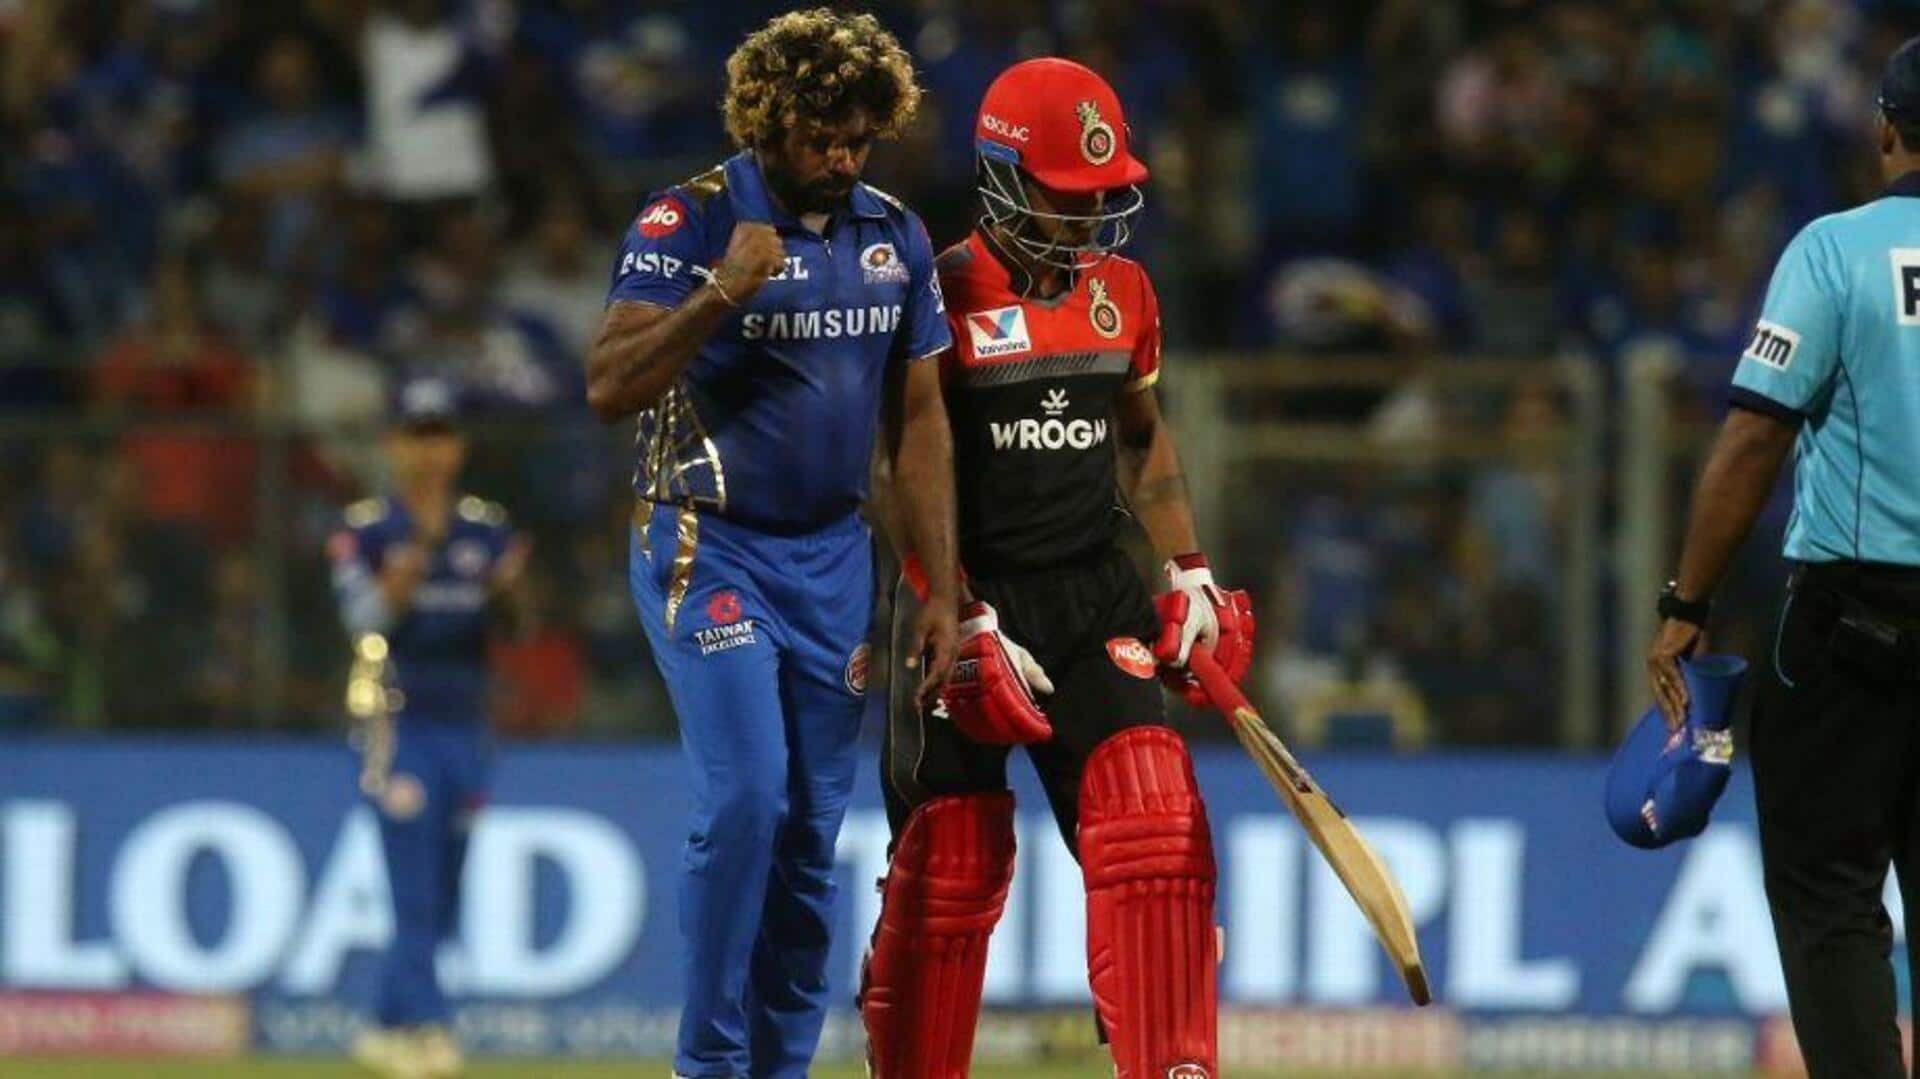 IPL: Here are lopsided player battles with no dismissals